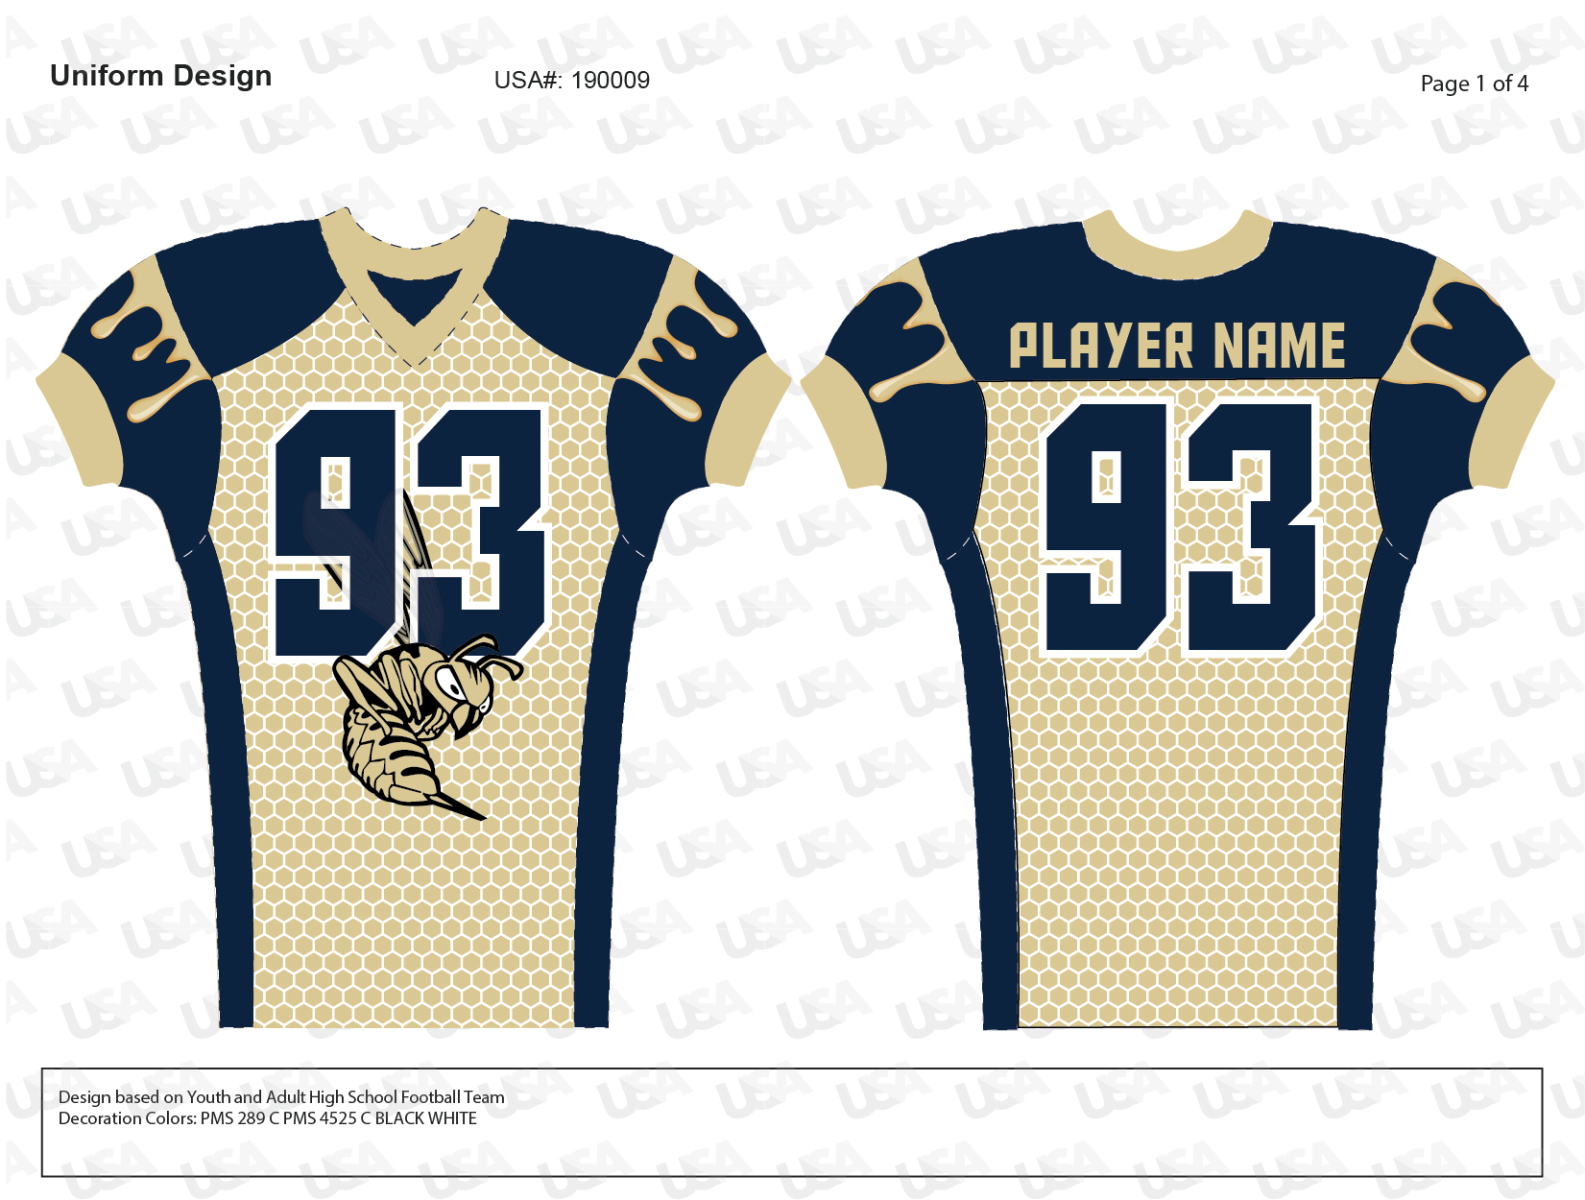 Download HORNETS FOOTBALL COMPRESSION JERSEY DESIGN MOCKUP by ...